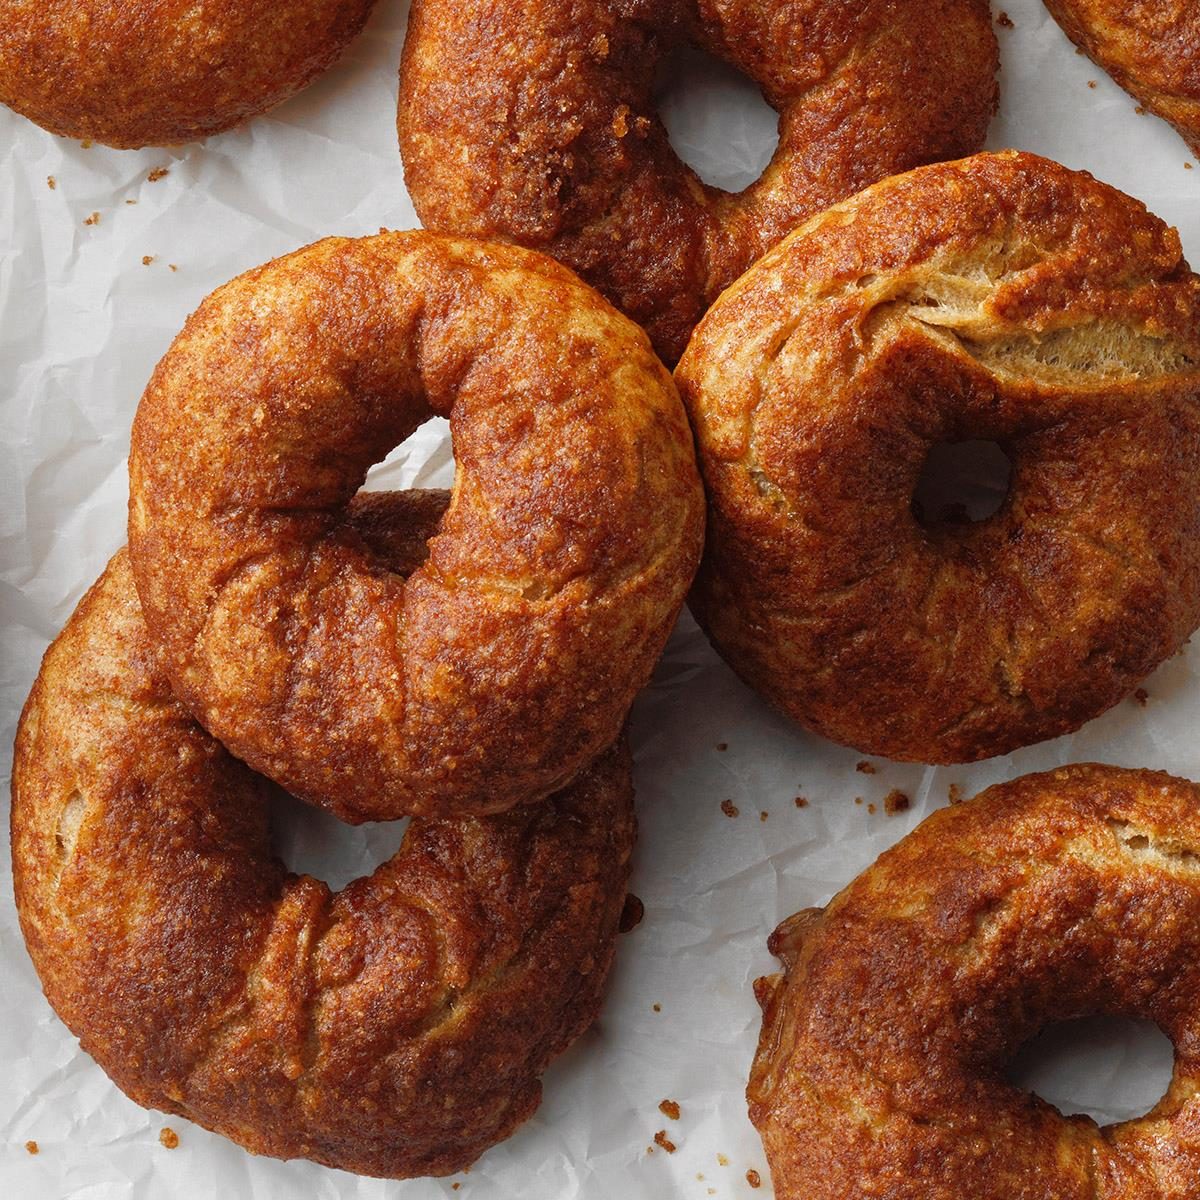 https://www.tasteofhome.com/wp-content/uploads/2018/01/Cinnamon-Bagels-with-Crunchy-Topping_EXPS_CIBZ22_50381_BonE12_09_10b-11.jpg?fit=700%2C1024